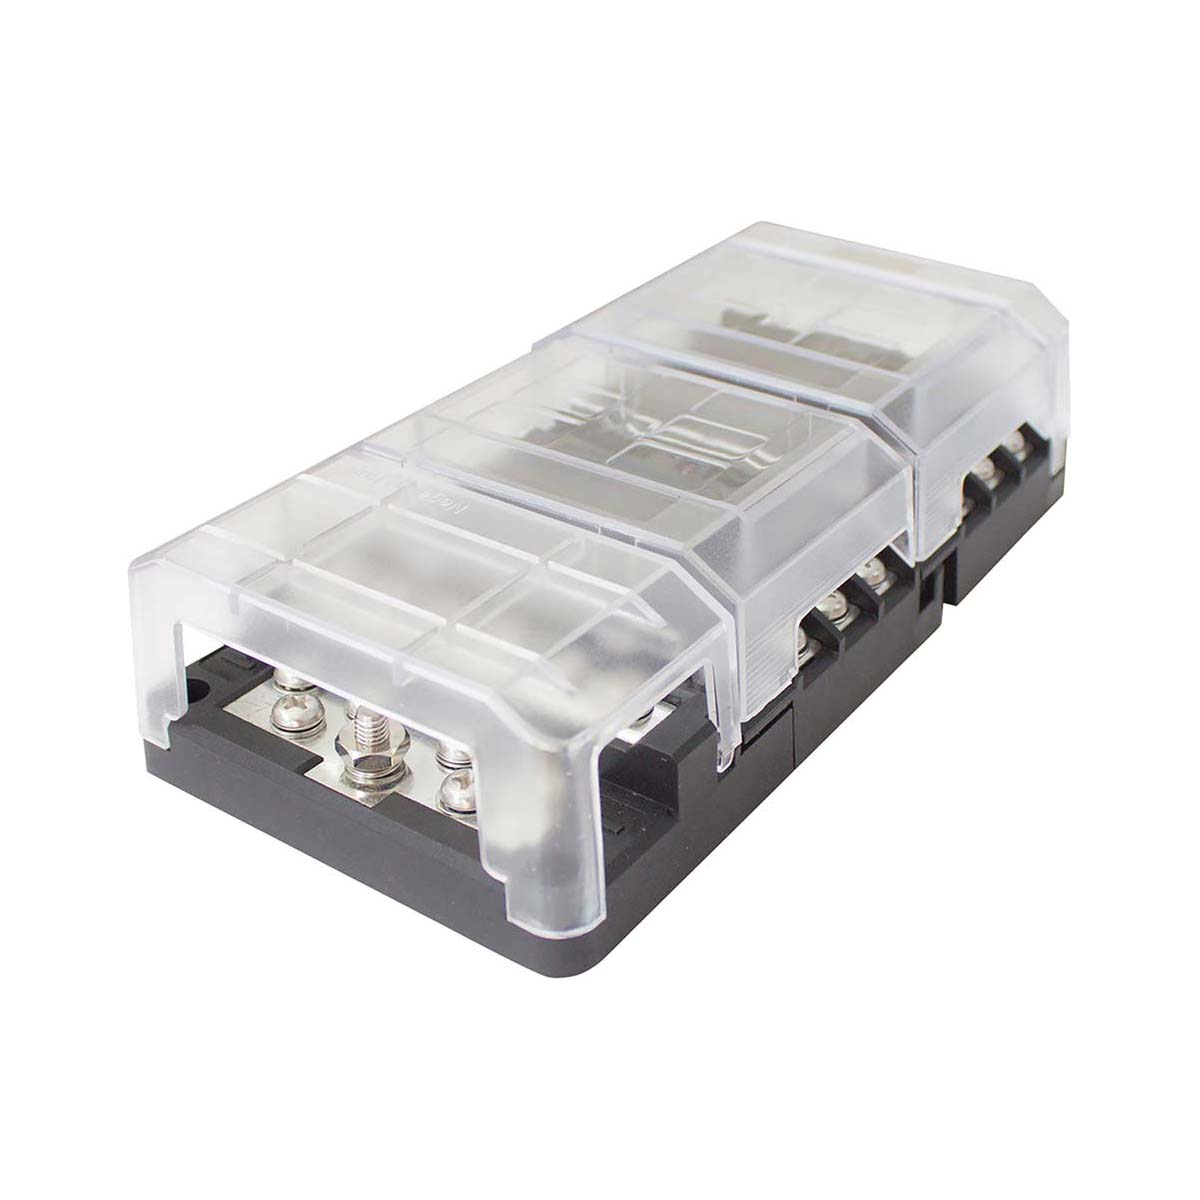 KT Cables 12 Gang Fuse Box with LED Indicator